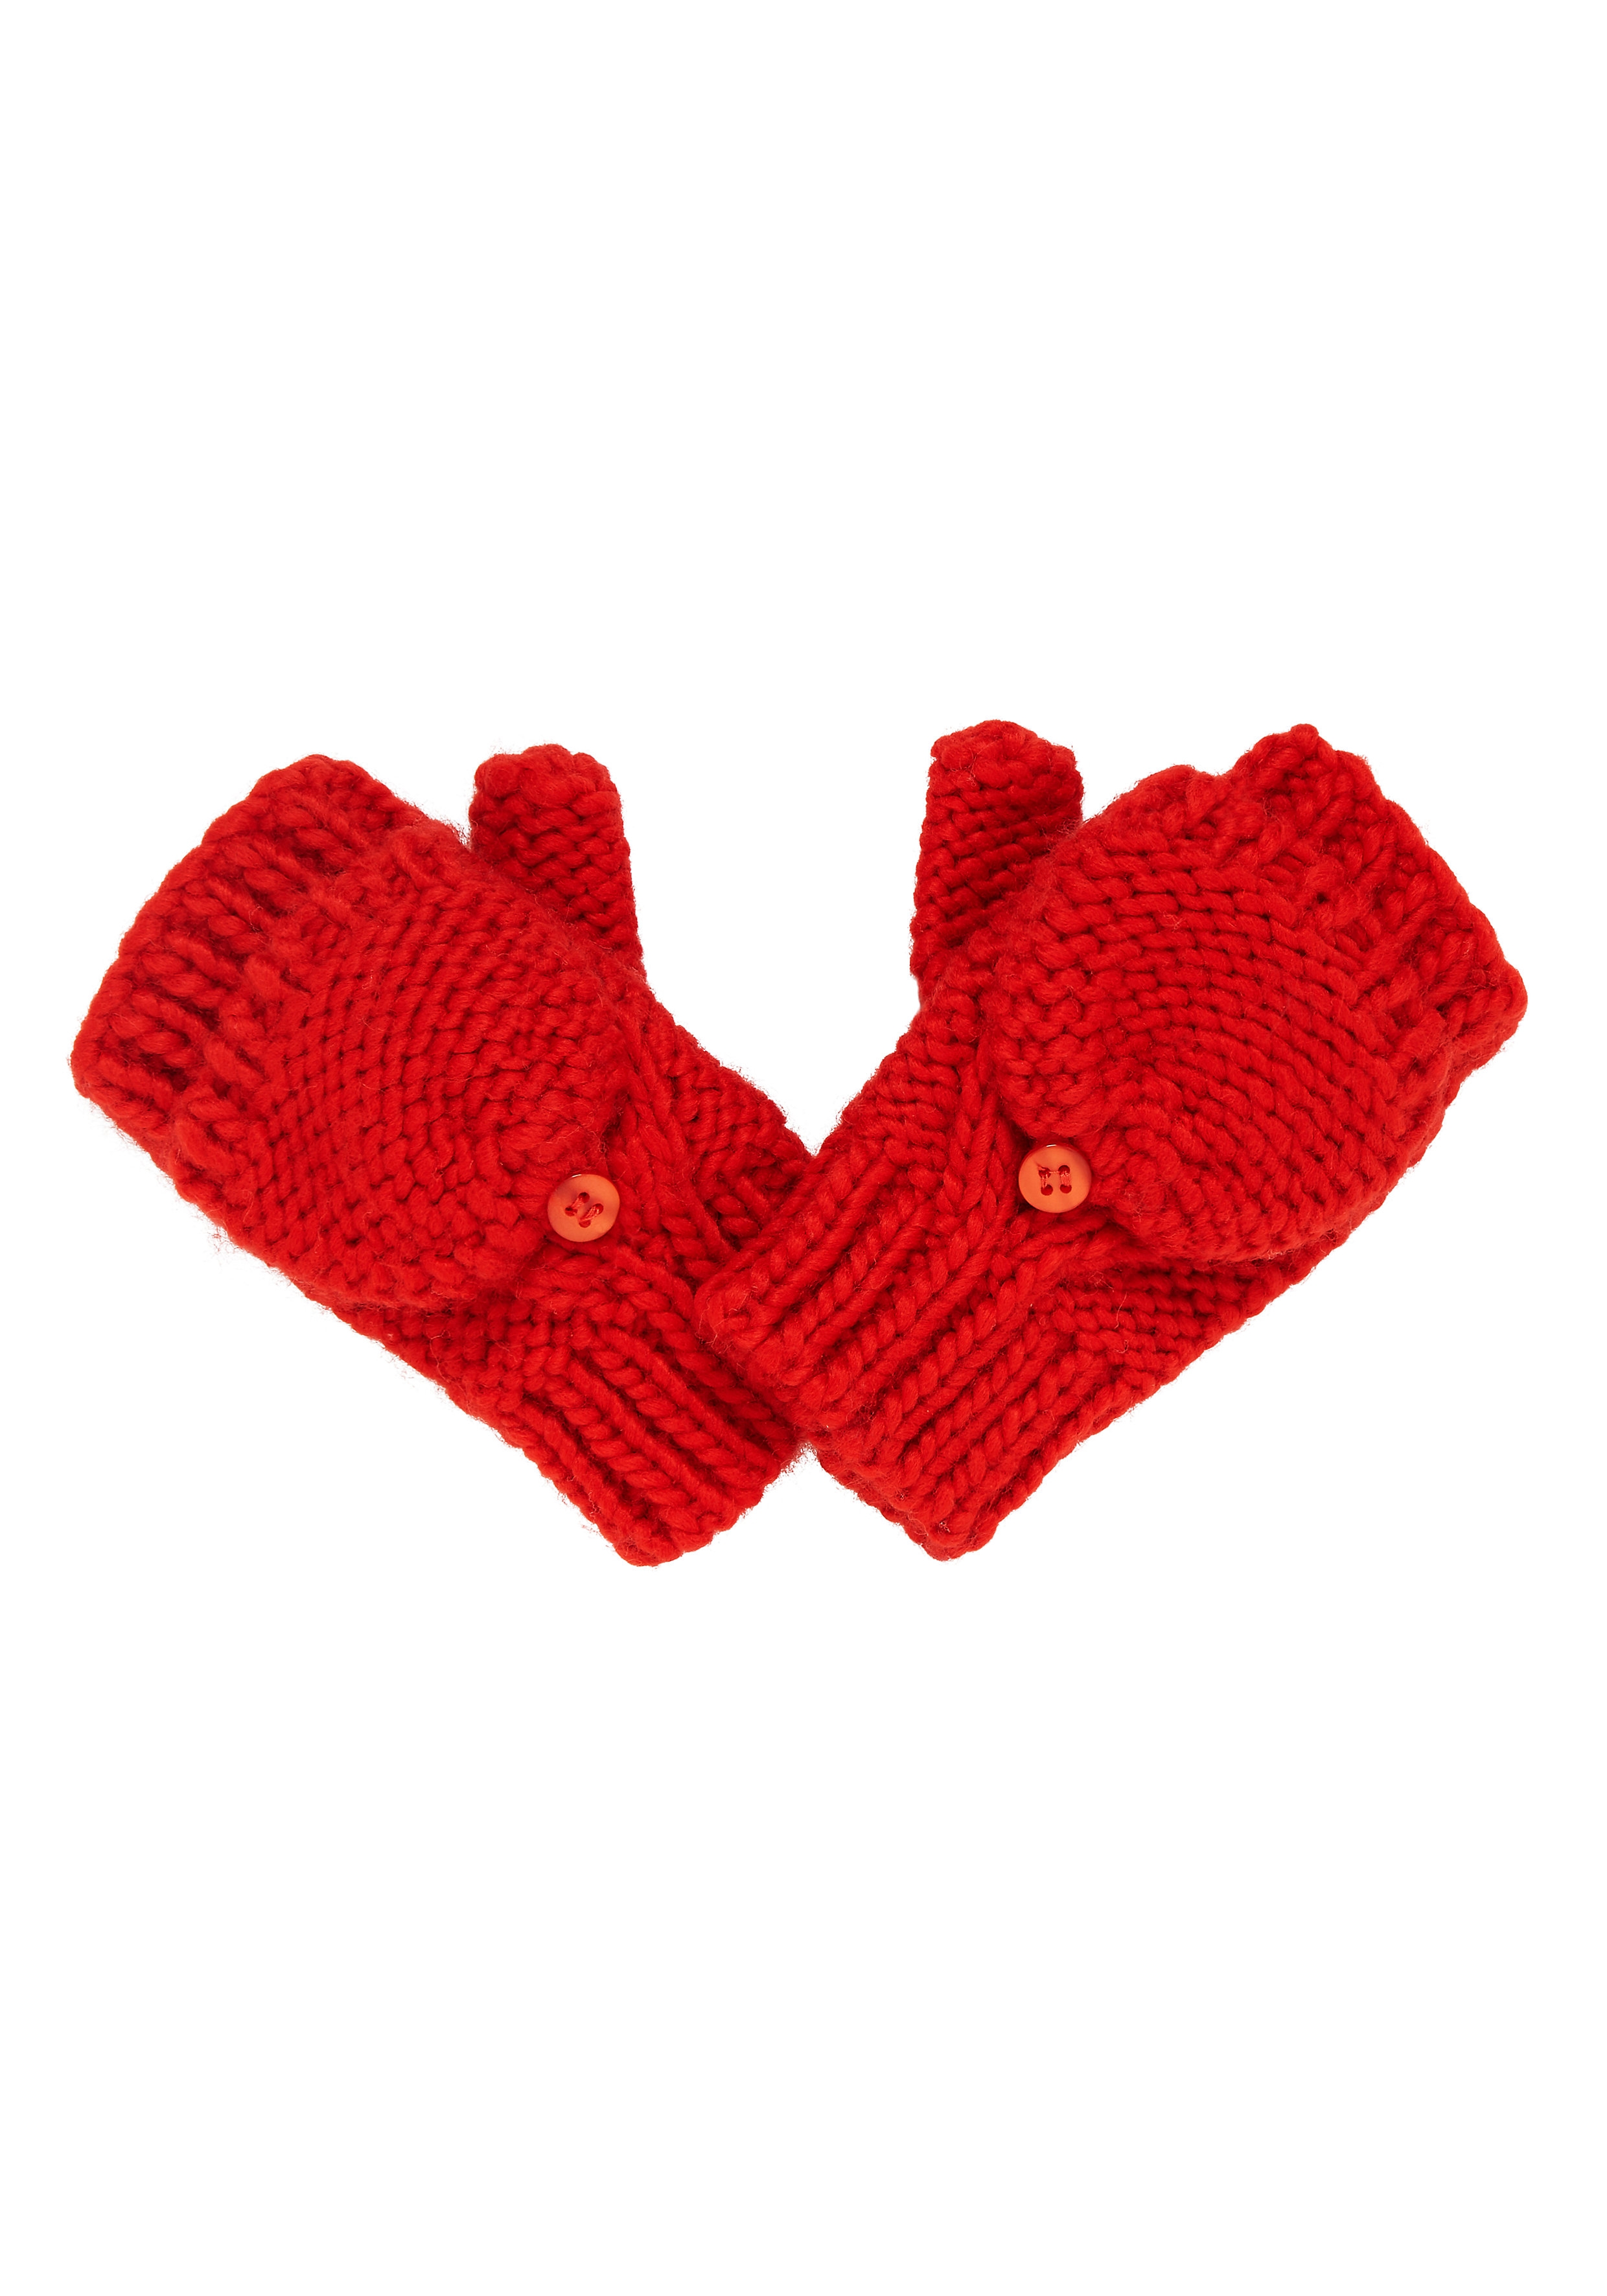 Boys Mittens Cable Knit - Red